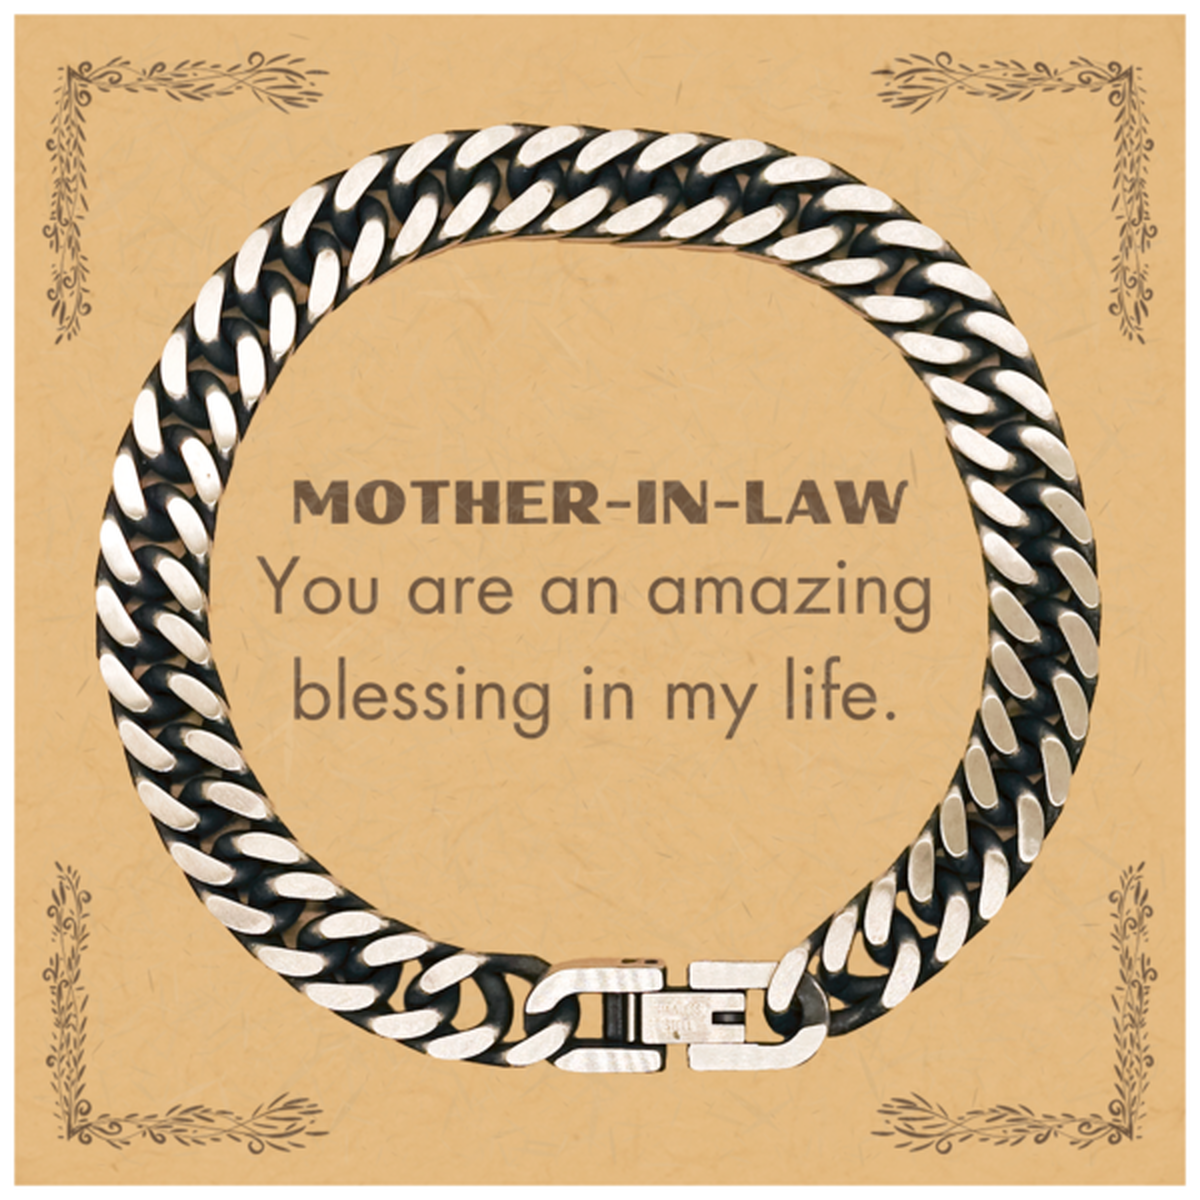 Mother-In-Law Cuban Link Chain Bracelet, You are an amazing blessing in my life, Thank You Gifts For Mother-In-Law, Inspirational Birthday Christmas Unique Gifts For Mother-In-Law